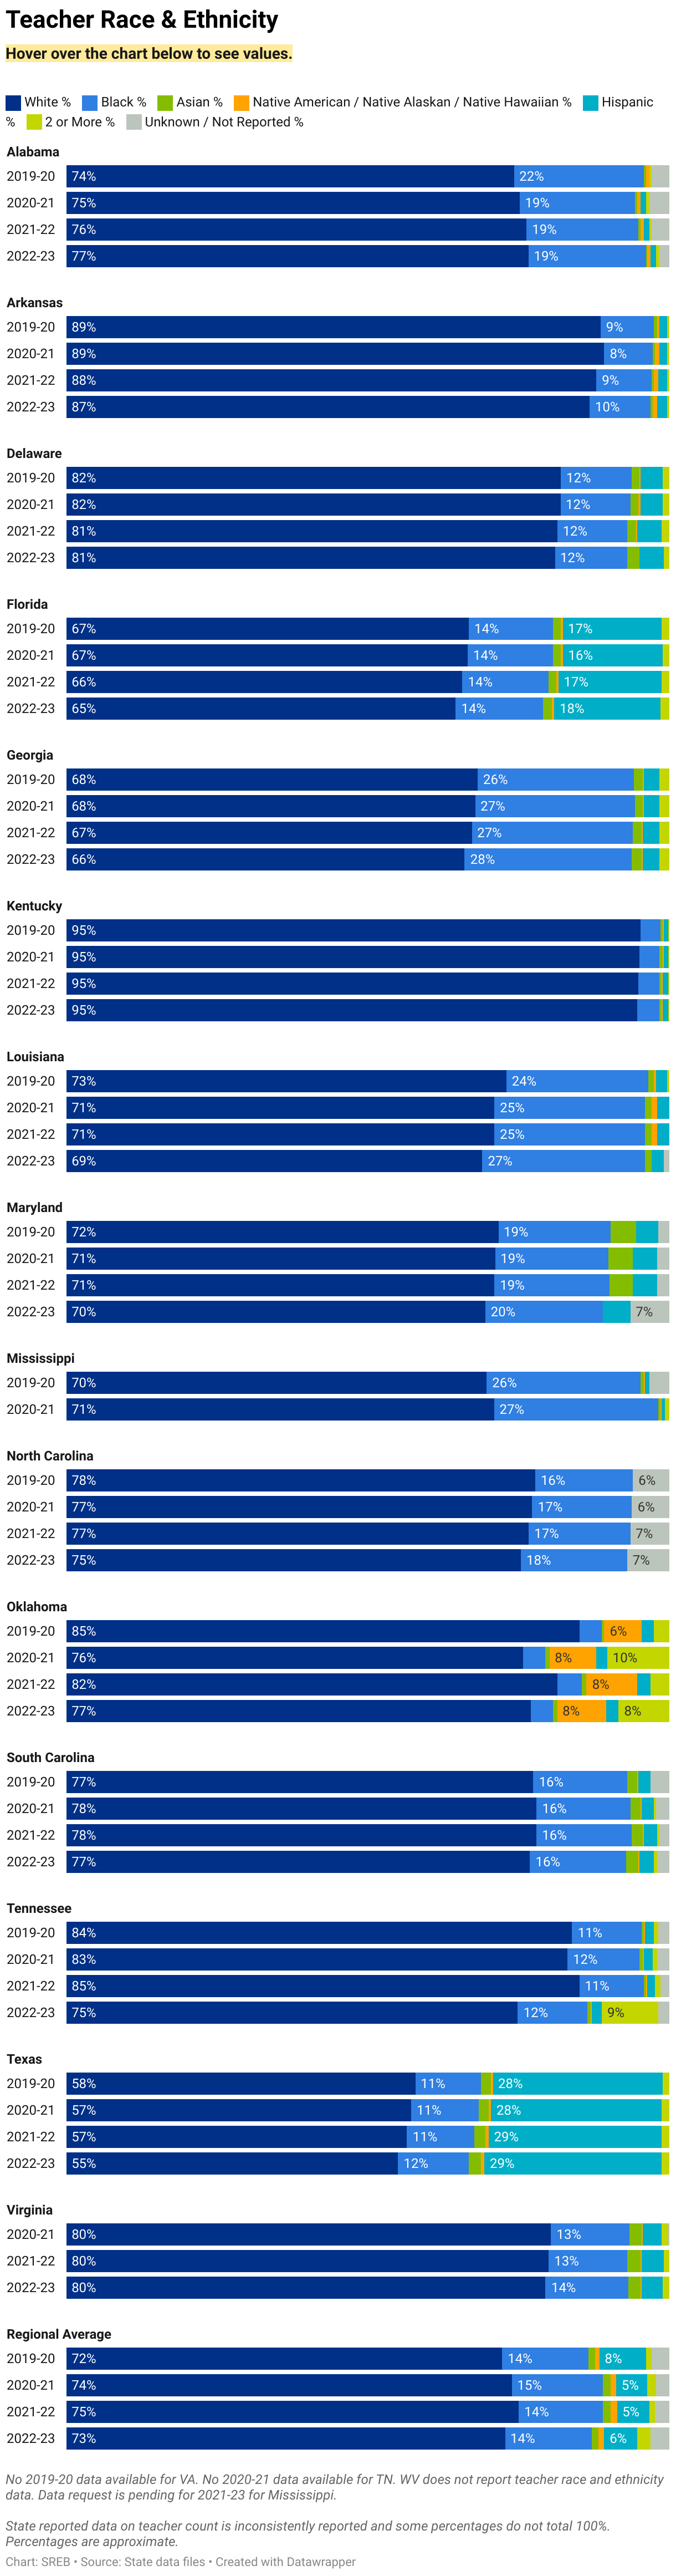 Sets of bar graphs for each state in the SREB region showing teacher demographics by race/ethnicity for 2019-20 through 2022-23. 